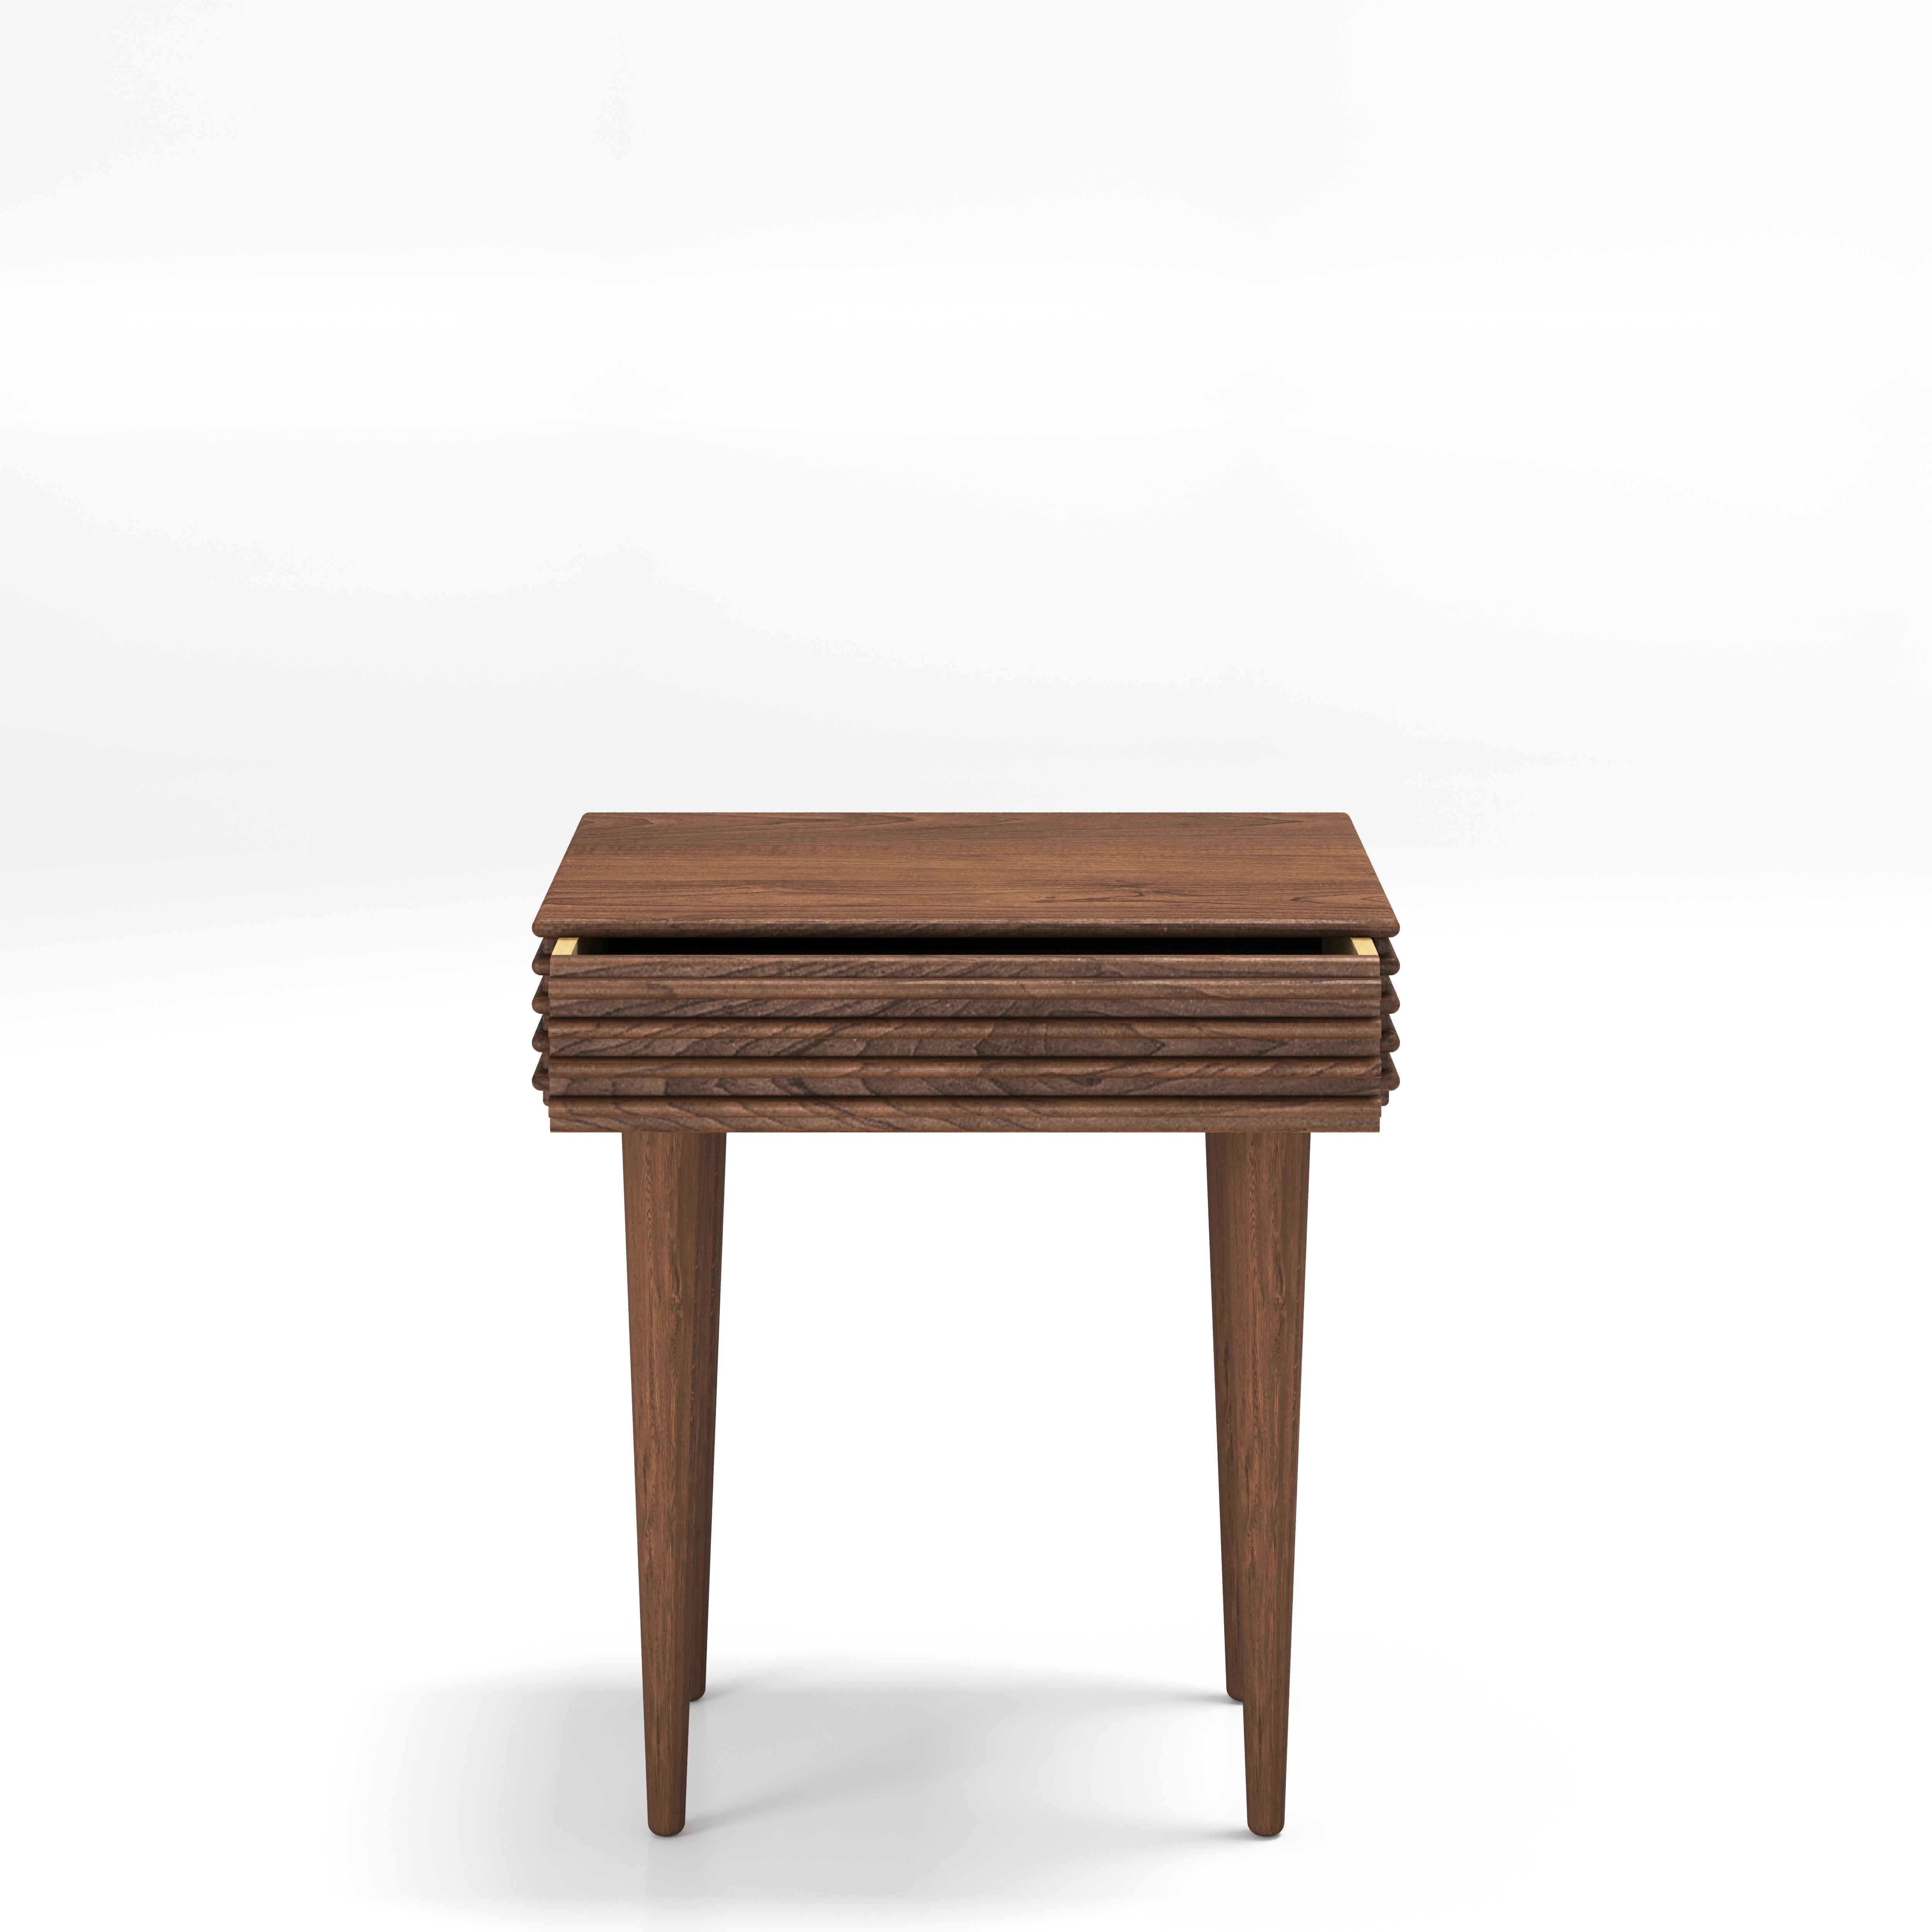 Danish Contemporary Night Table 'Groove' by DK3, Walnut, M 42.5 cm, More Wood Finishes For Sale